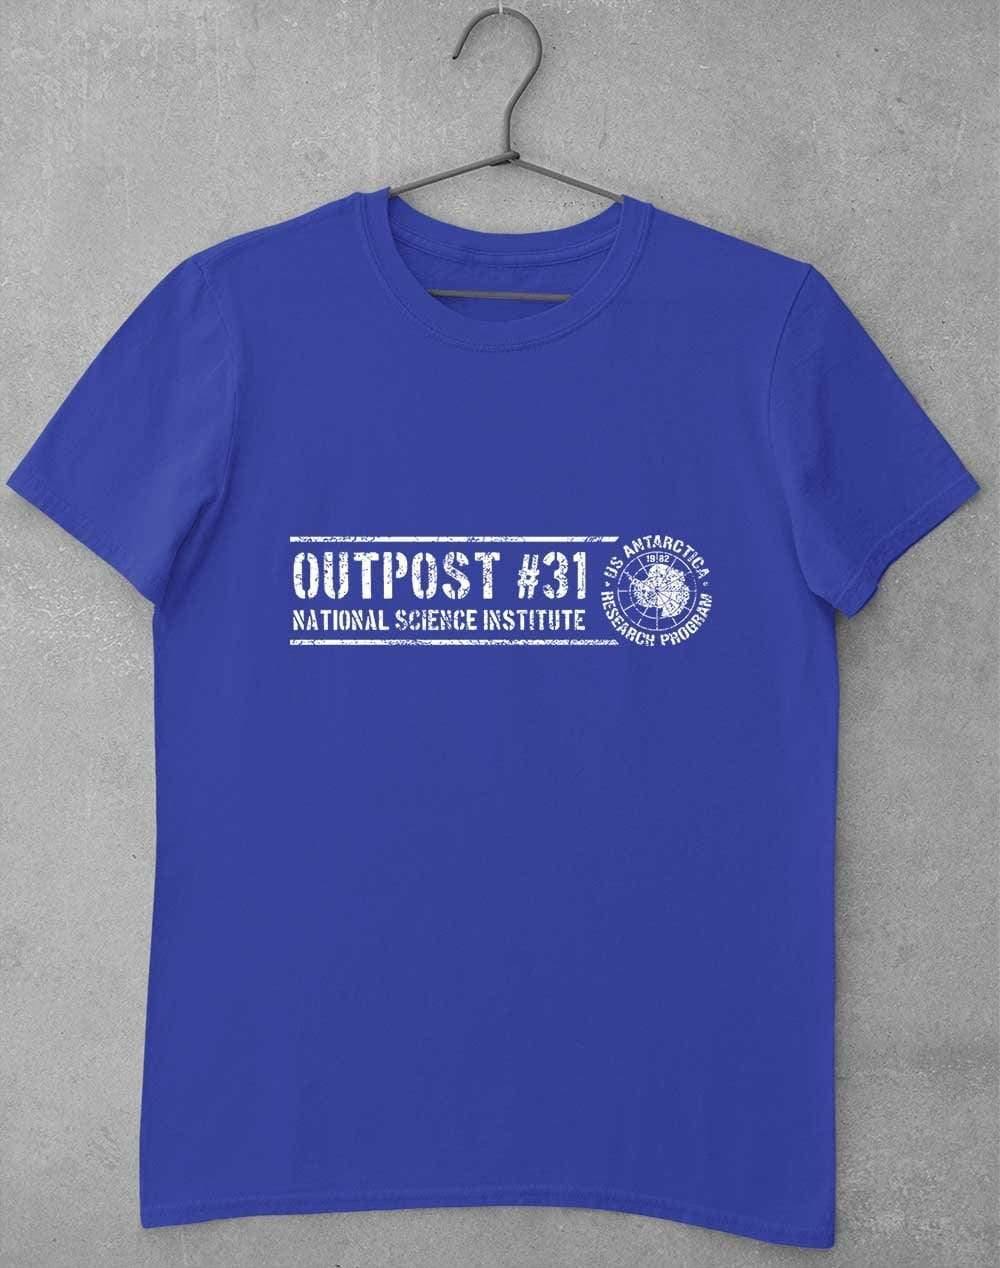 Outpost 31 Antarctica T-Shirt S / Royal  - Off World Tees